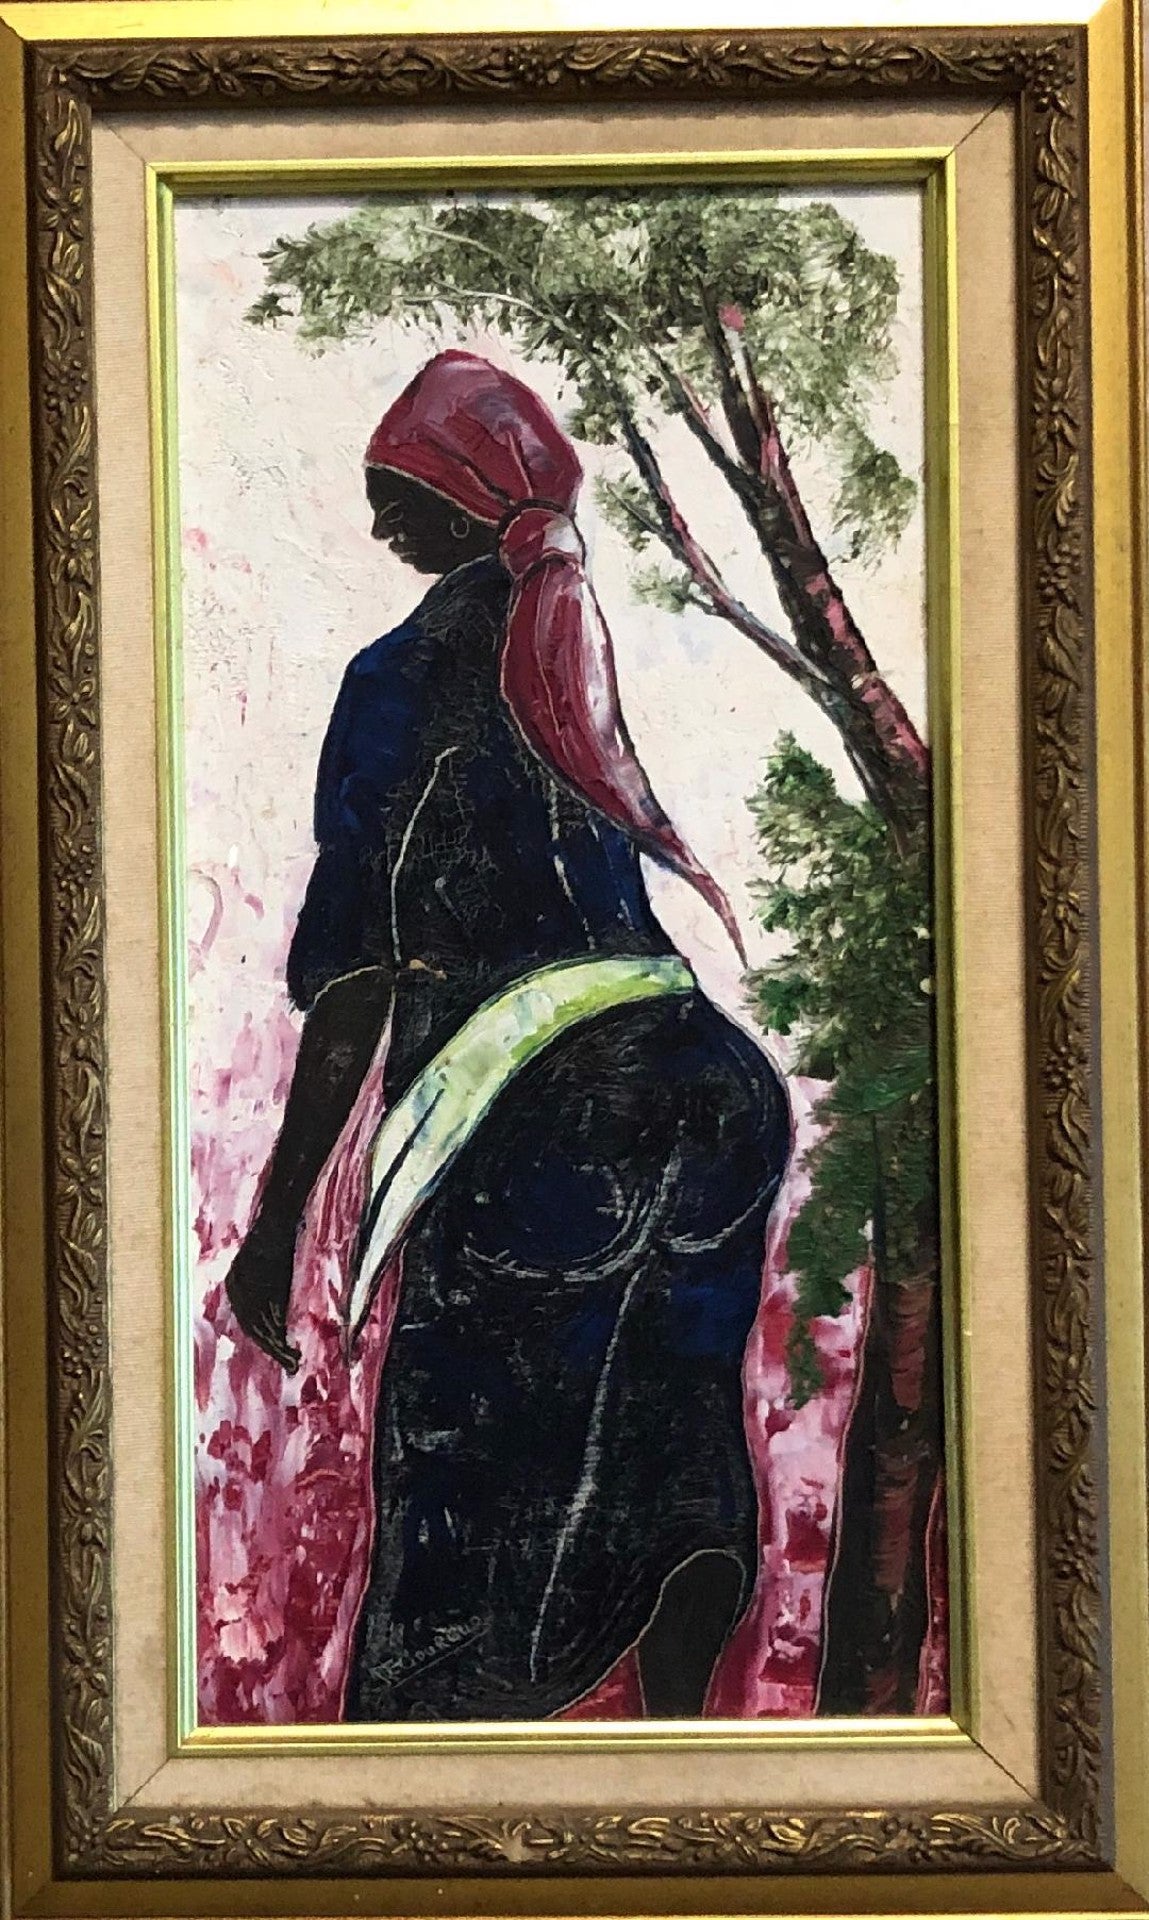 Jacques-Enguerrand Gourgue (Haitian, 1930-1996) "The Lady From Back" Oil on Board Framed Painting 16"h X 9"w #2GSN-NY